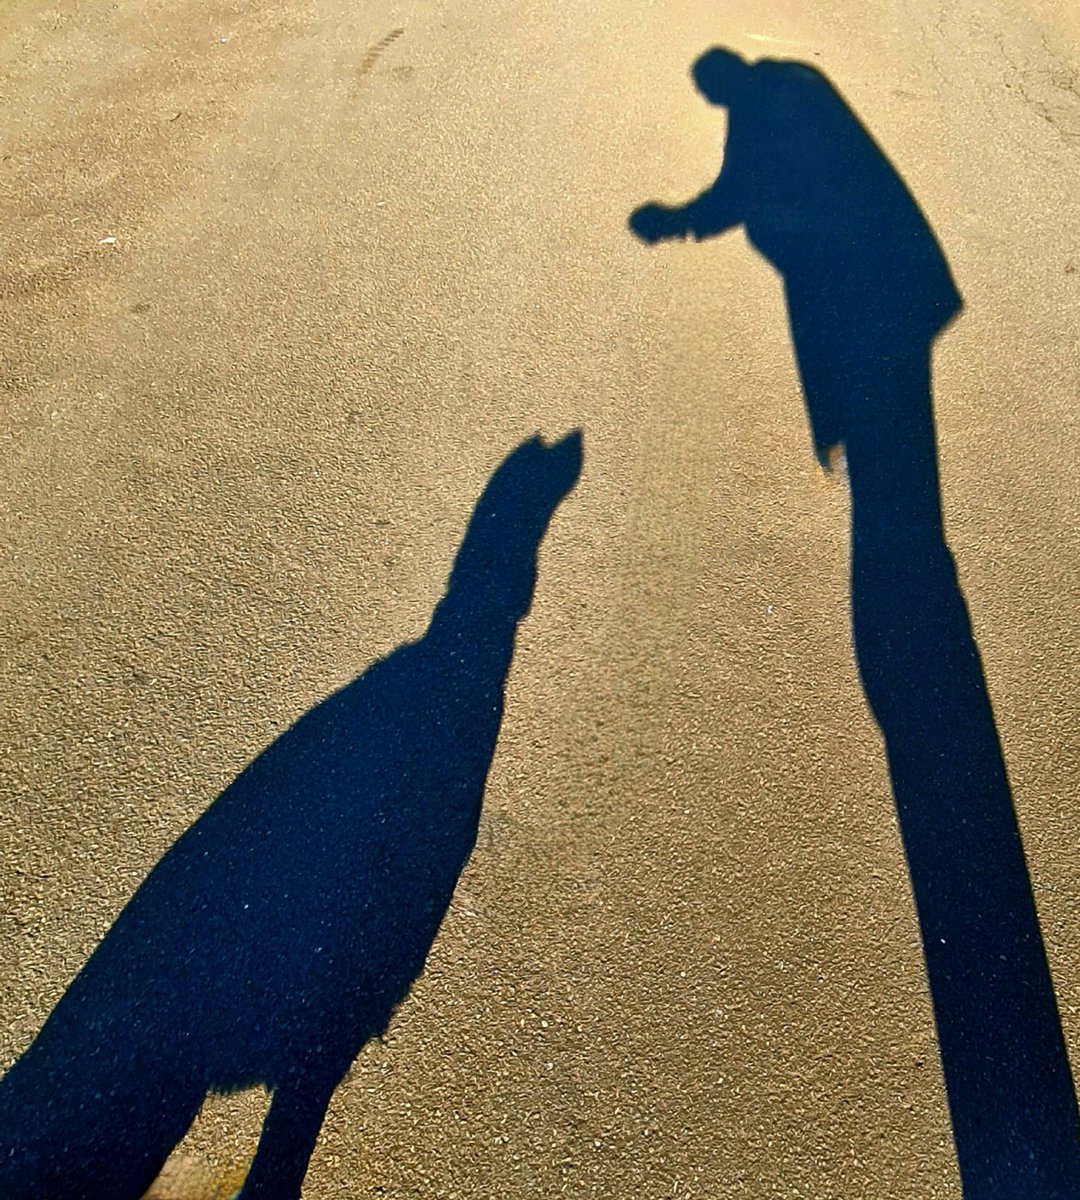 Having some fun on the evening dog walk with long shadows created by the setting sun. #glasgow #dog #dogwalking #shadow #longshadows #eveningsun #lateeveningsun #sunset